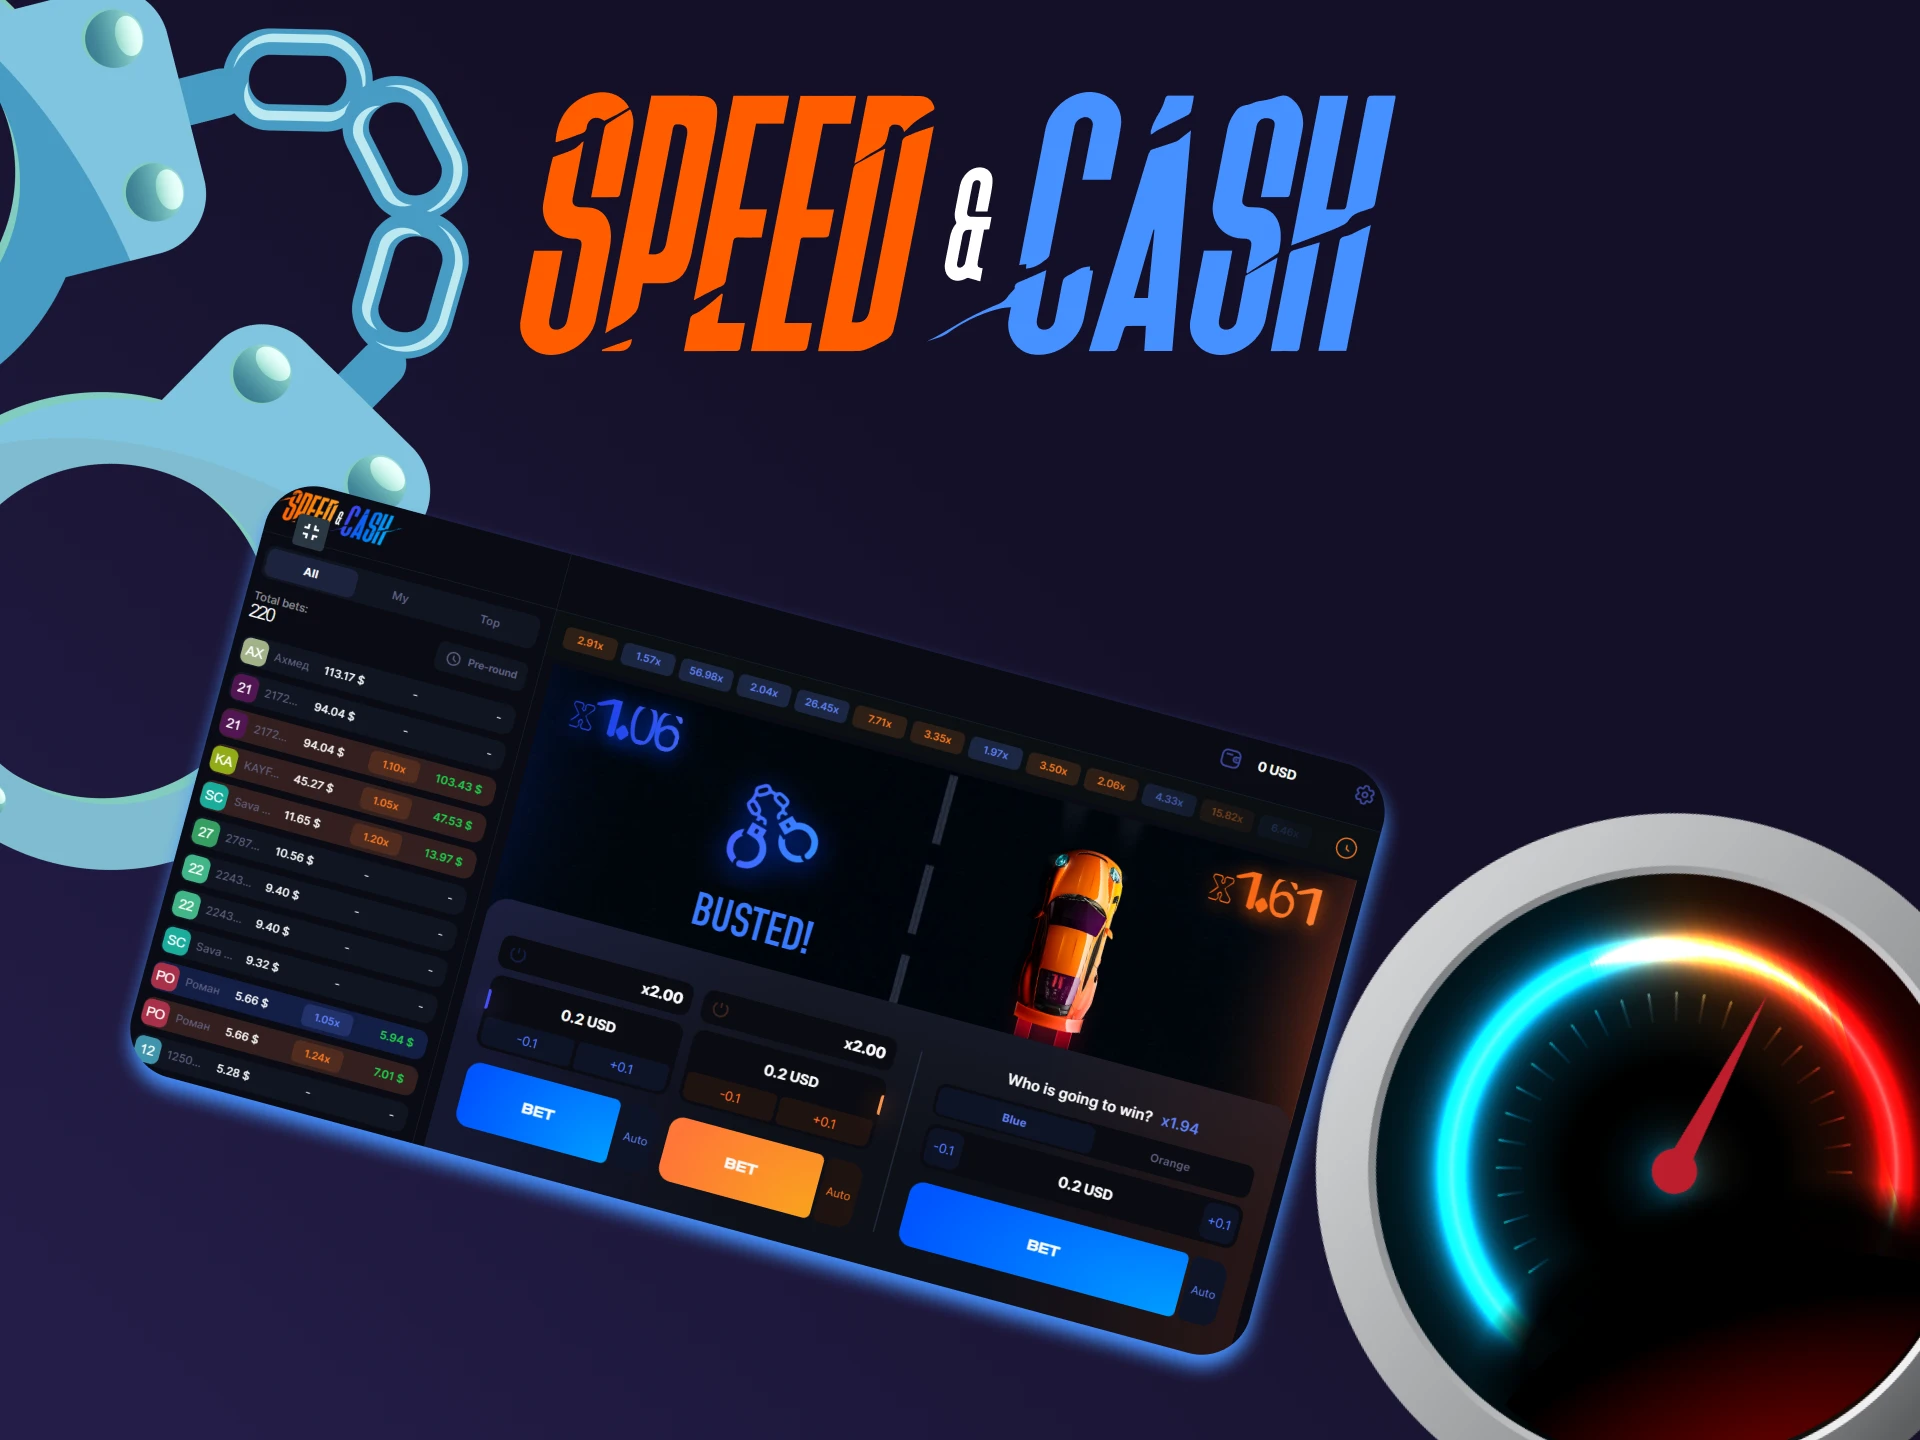 Find out if Lucky Jet is similar to Speed & Cash.